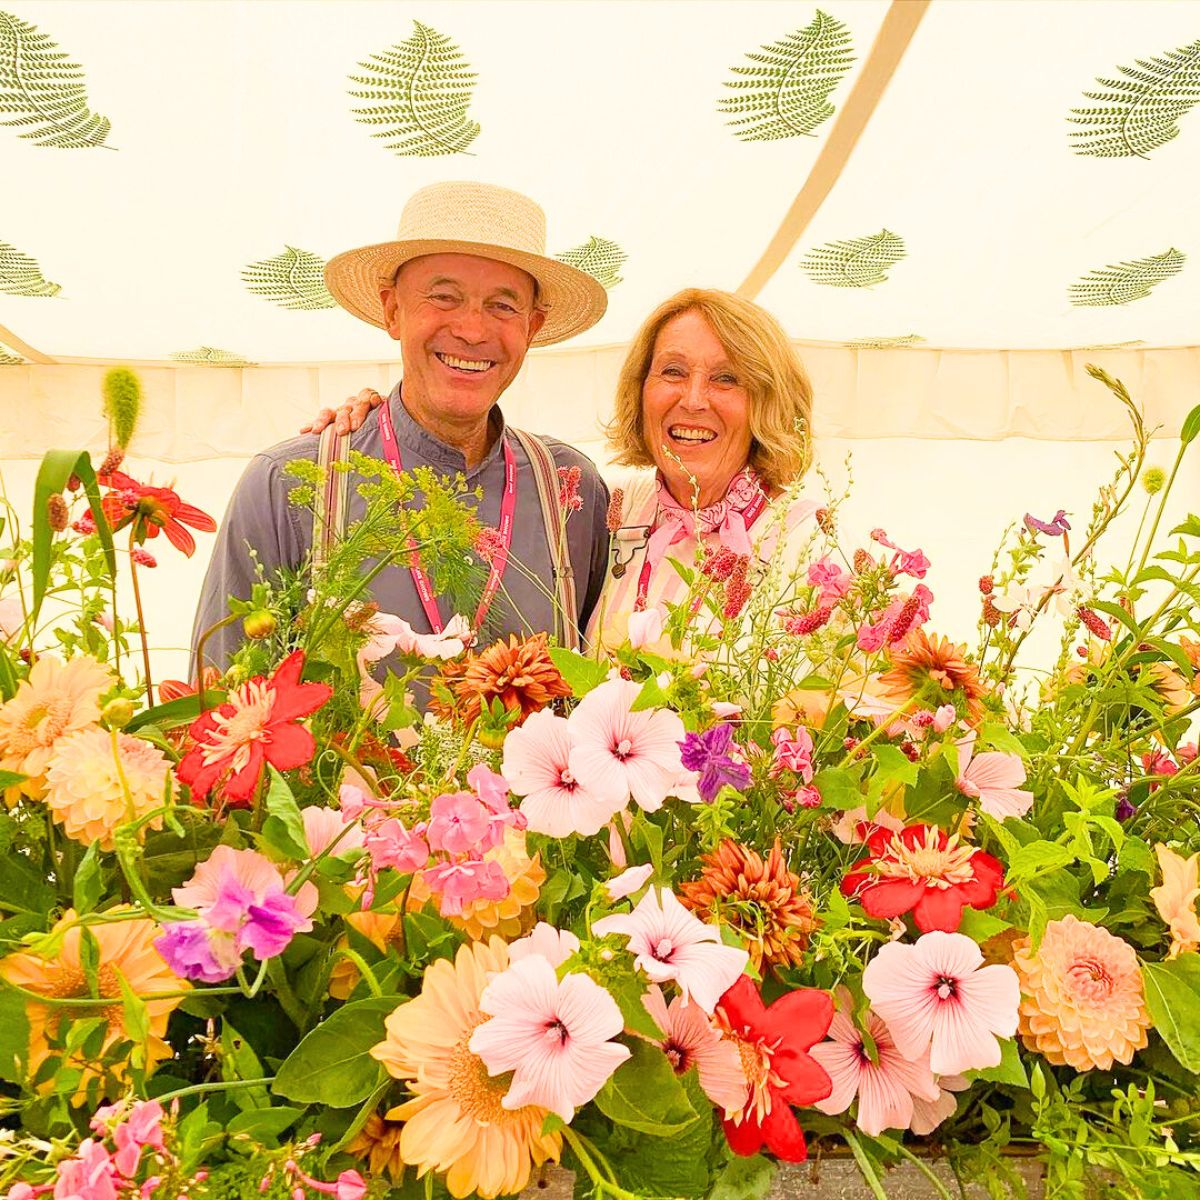 Eileen and Tim of Tinshed Flower Farm